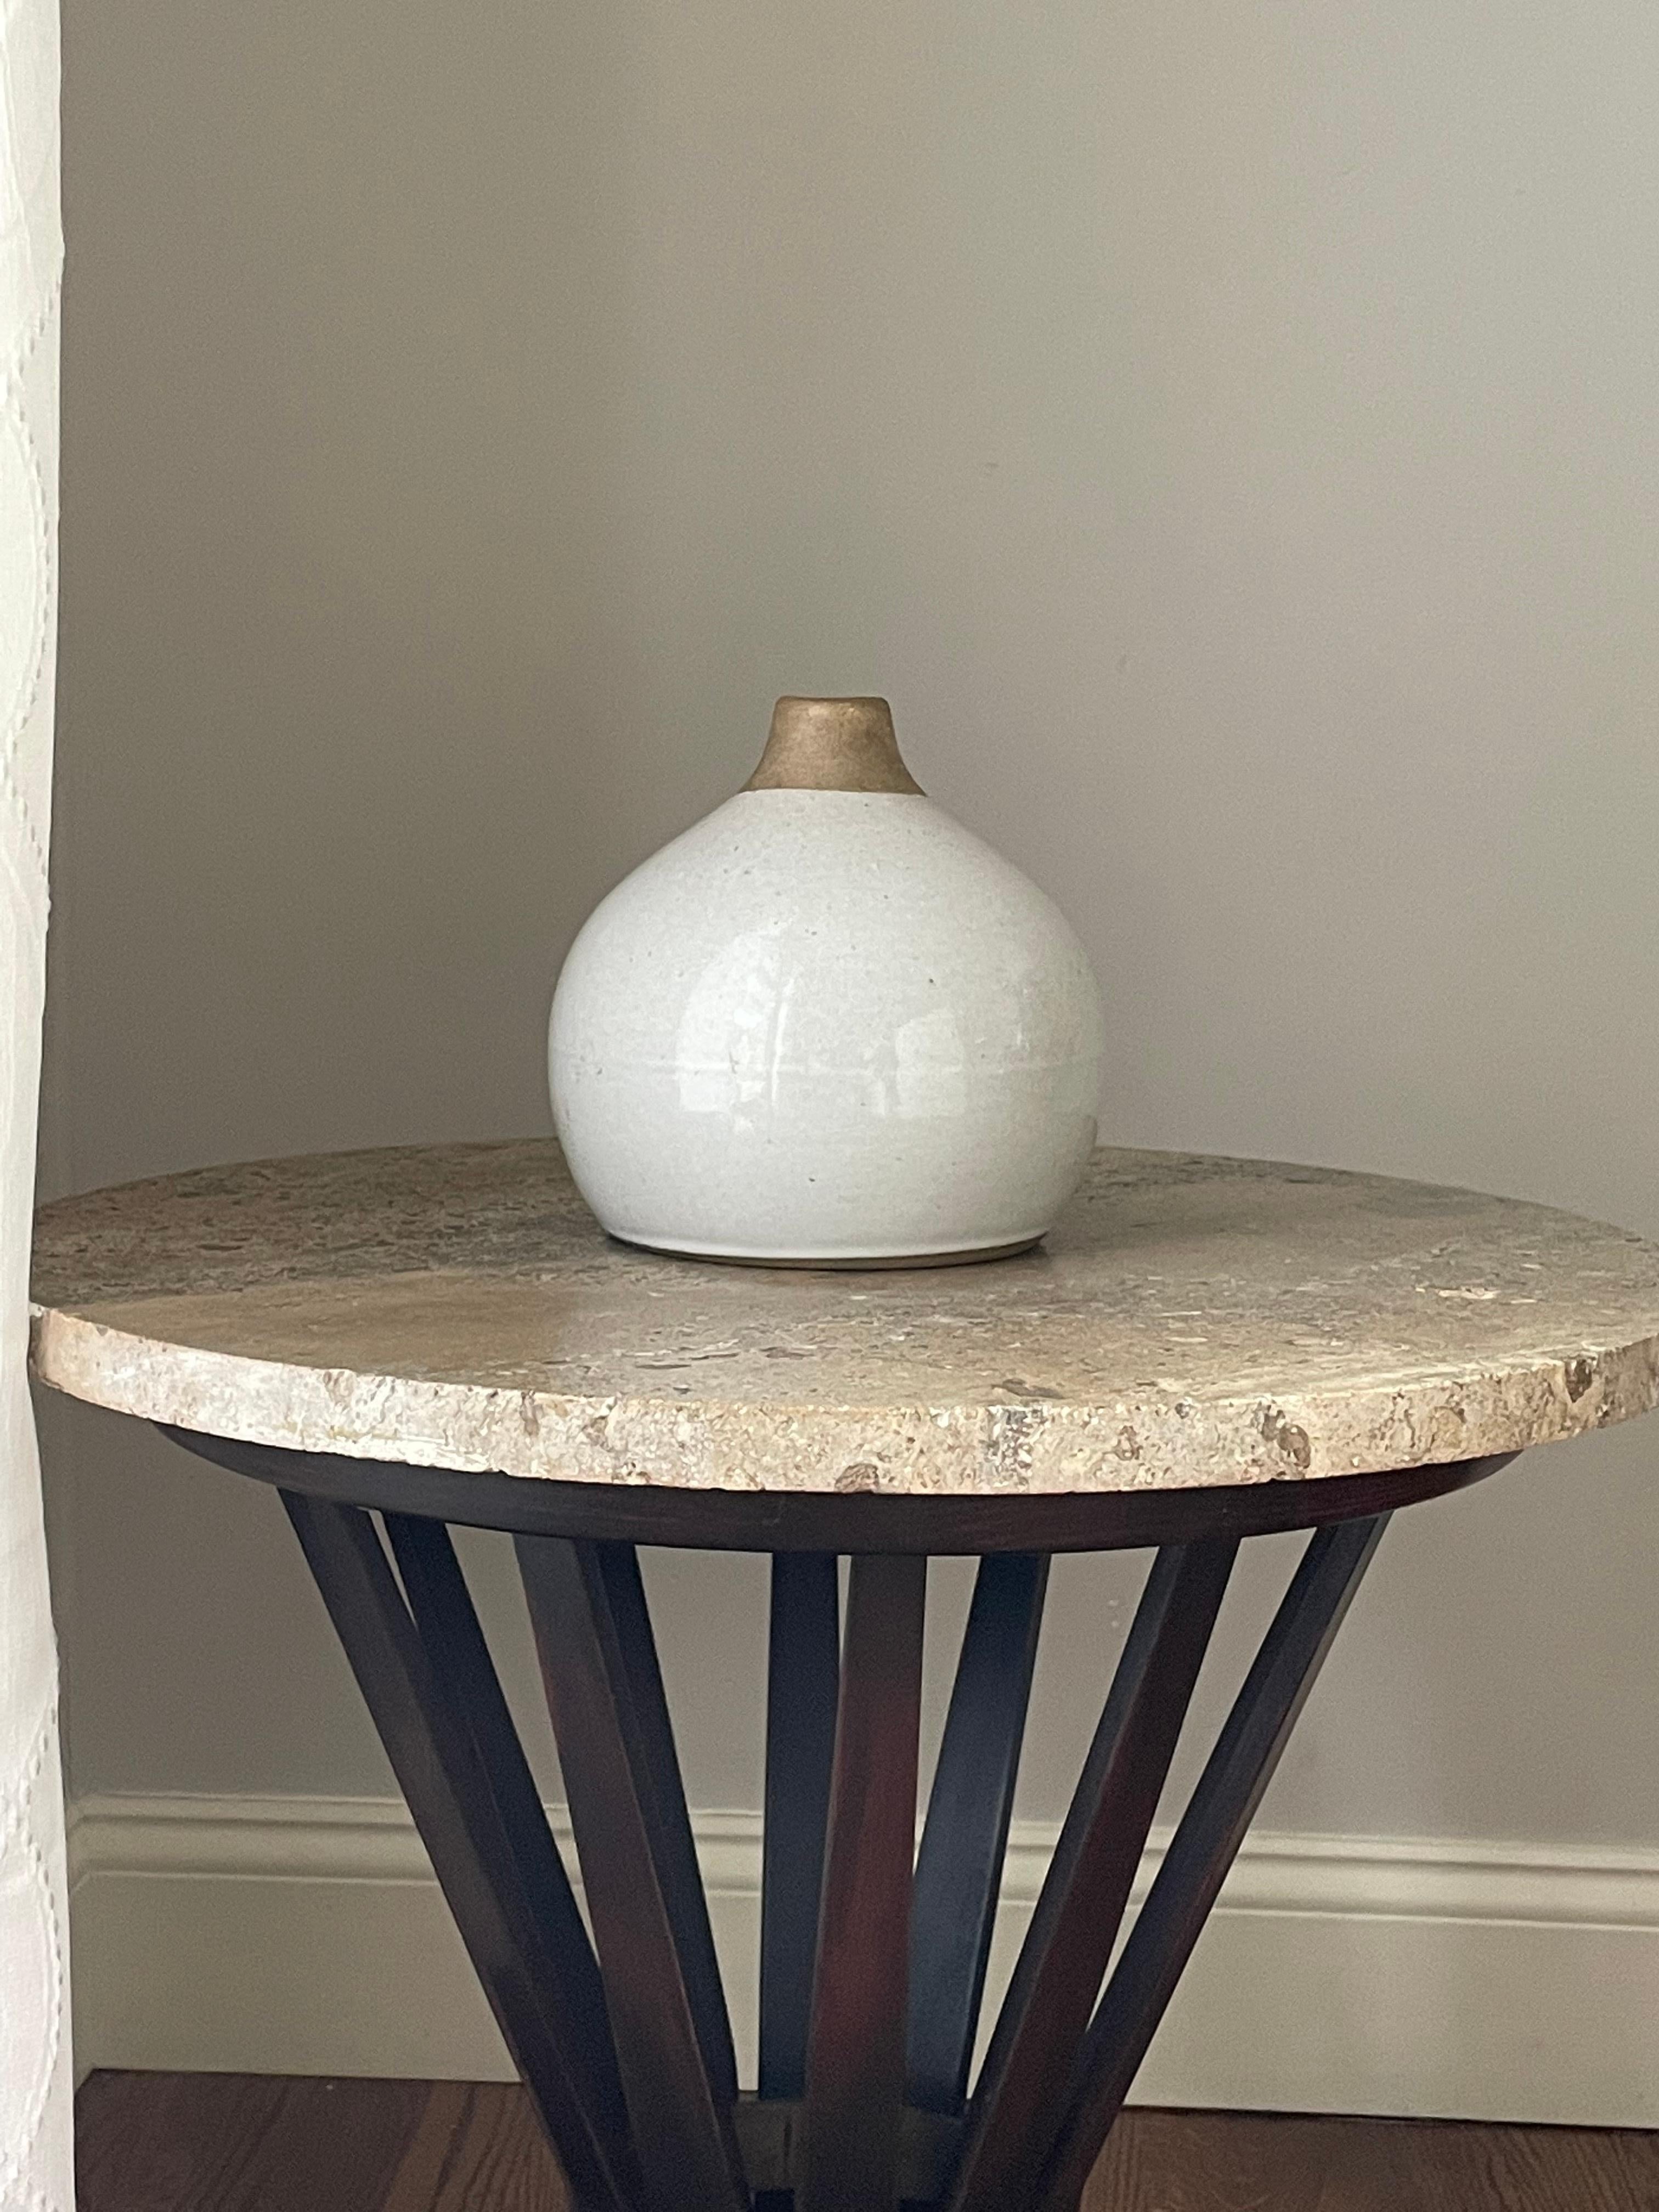 A large round vase designed by Jane and Gordon Martz for Marshall Studios. Famous for their highly desirable ceramic table lamps, offered here is a ceramic vase. Wonderful white and tan (unglazed) color palette. Very good condition, signed on